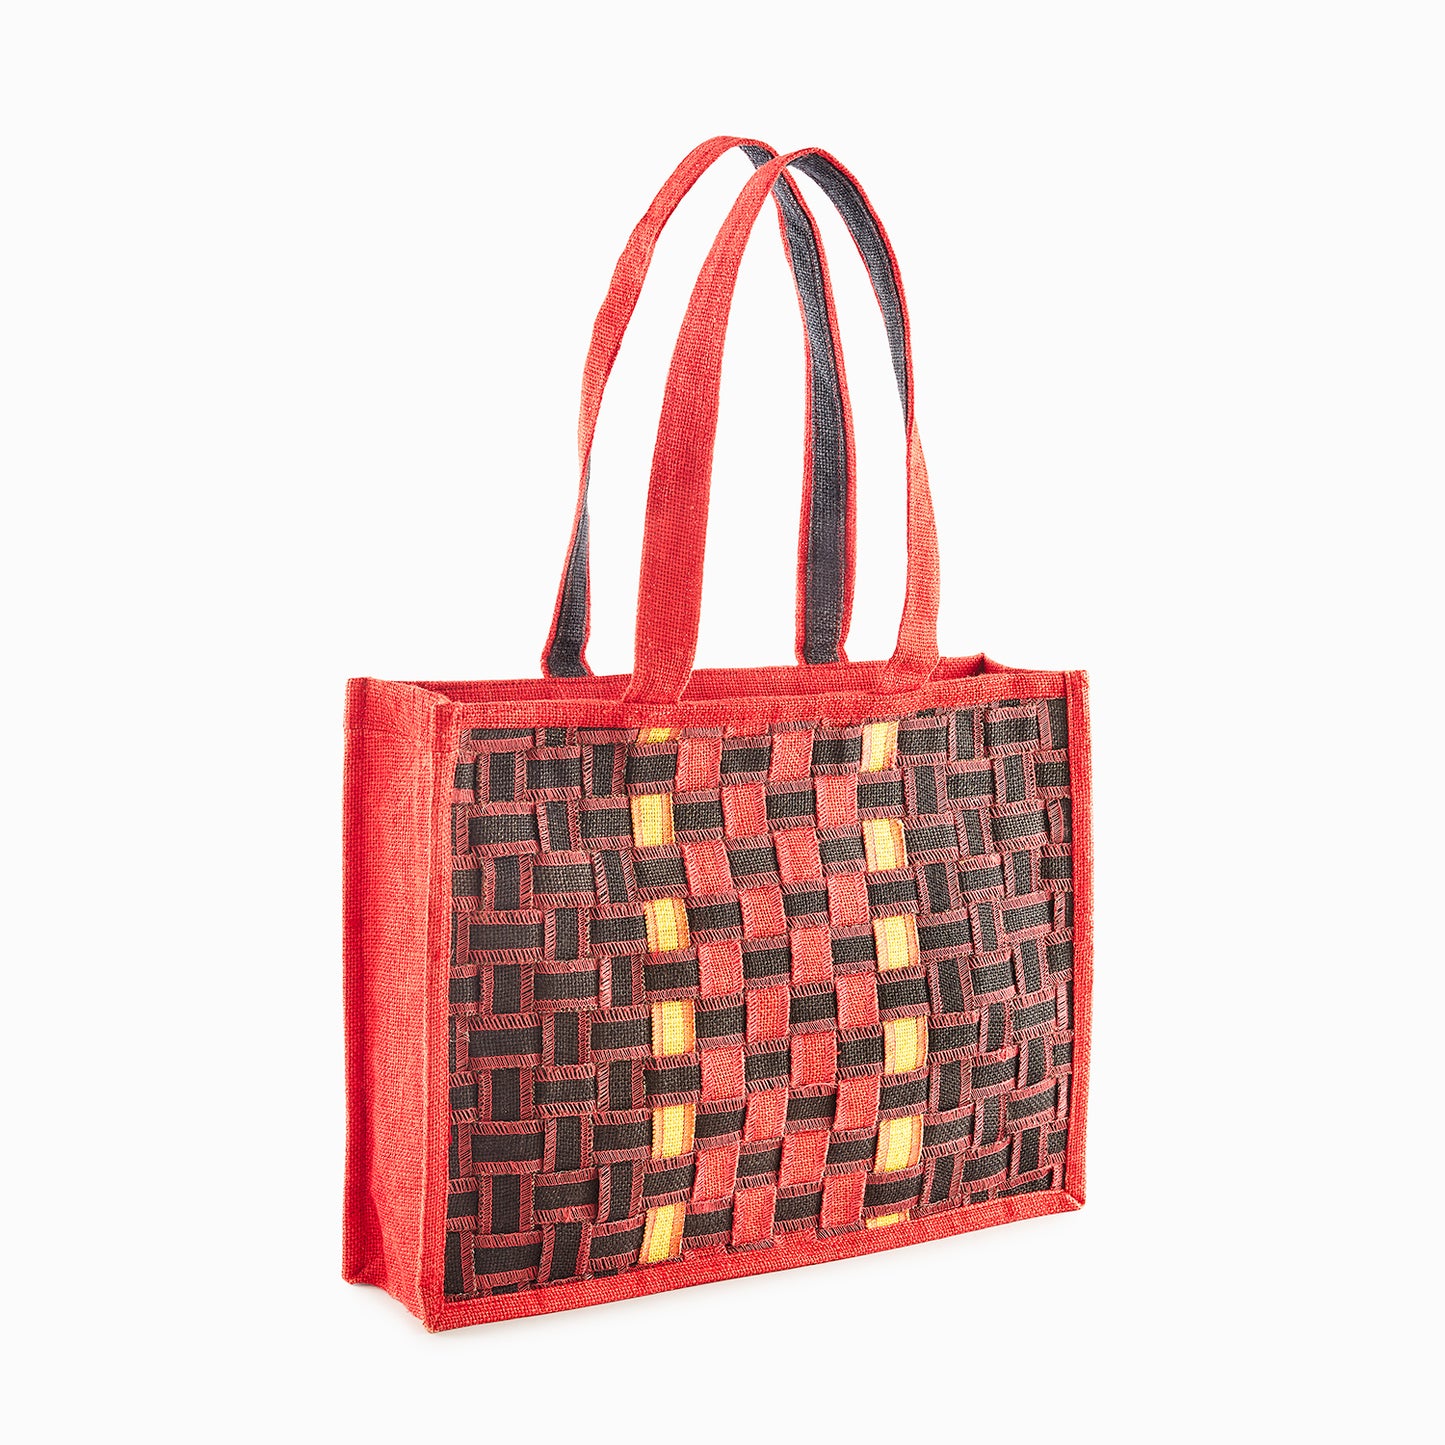 Black, Yellow and Red color Jute Bag; on Super Sale!